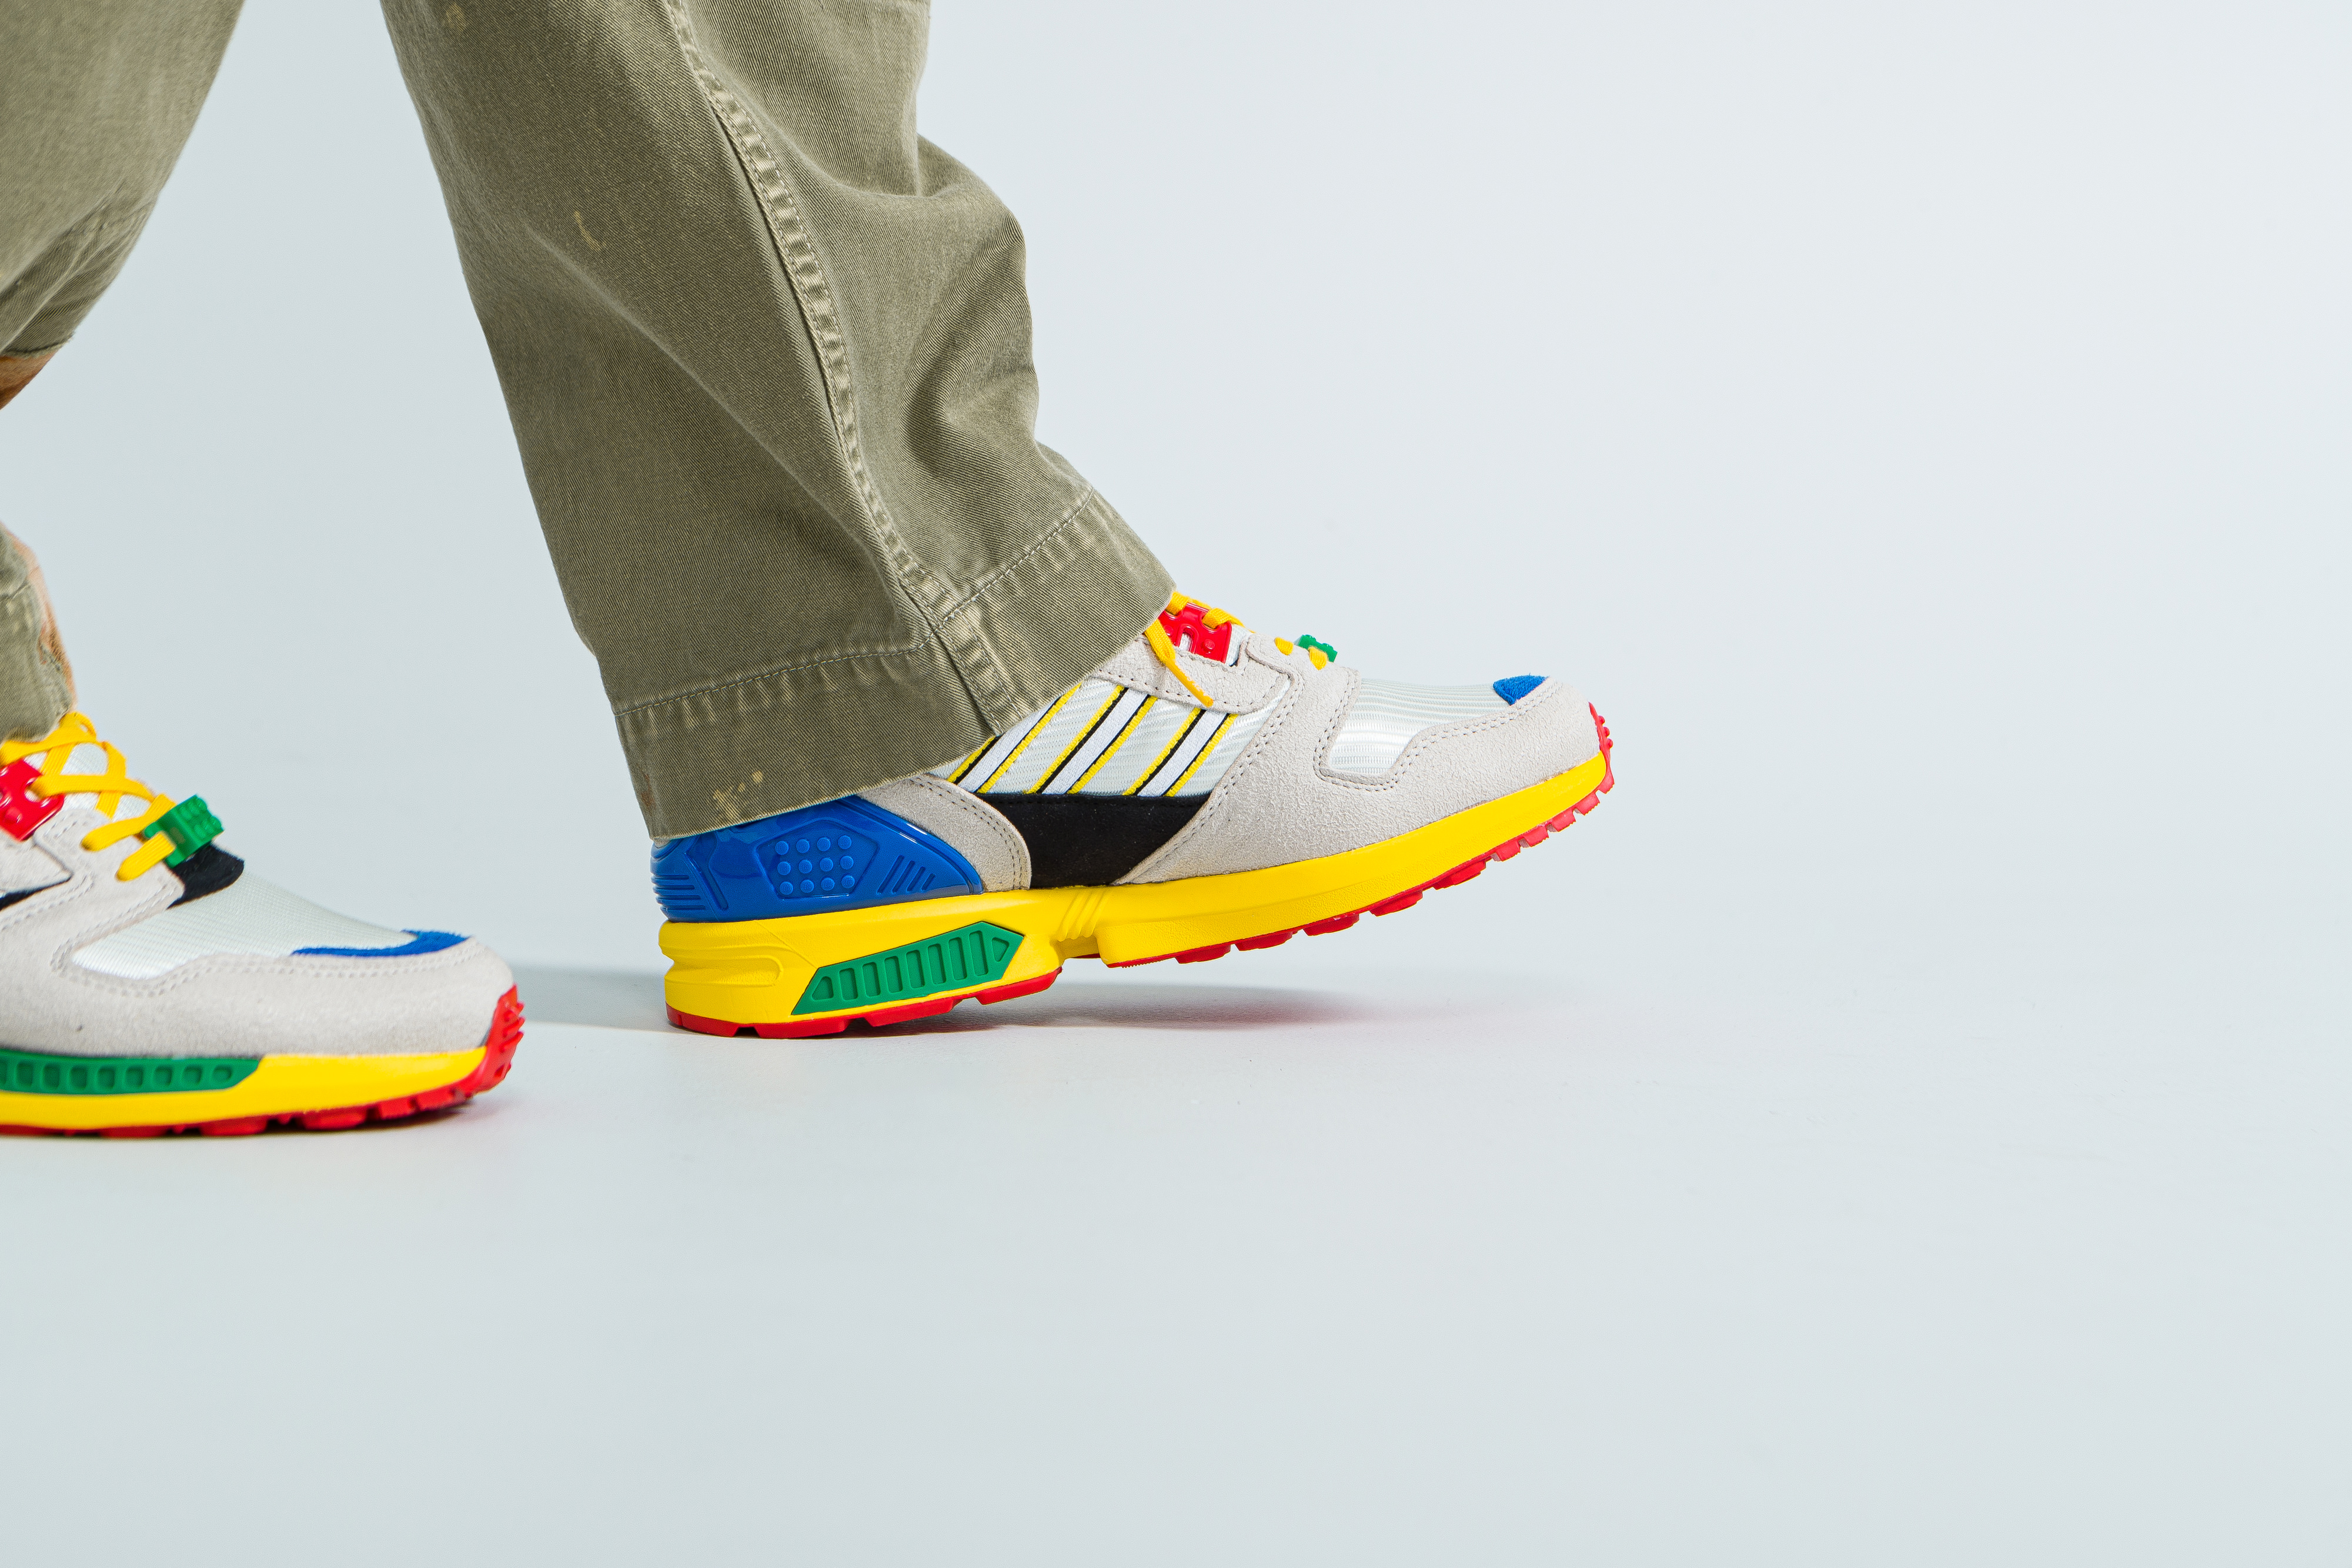 L is for Lego: adidas Originals celebrate everyone’s favourite interlocking blocks with their latest instalment of the A-ZX with the Lego ZX 8000.